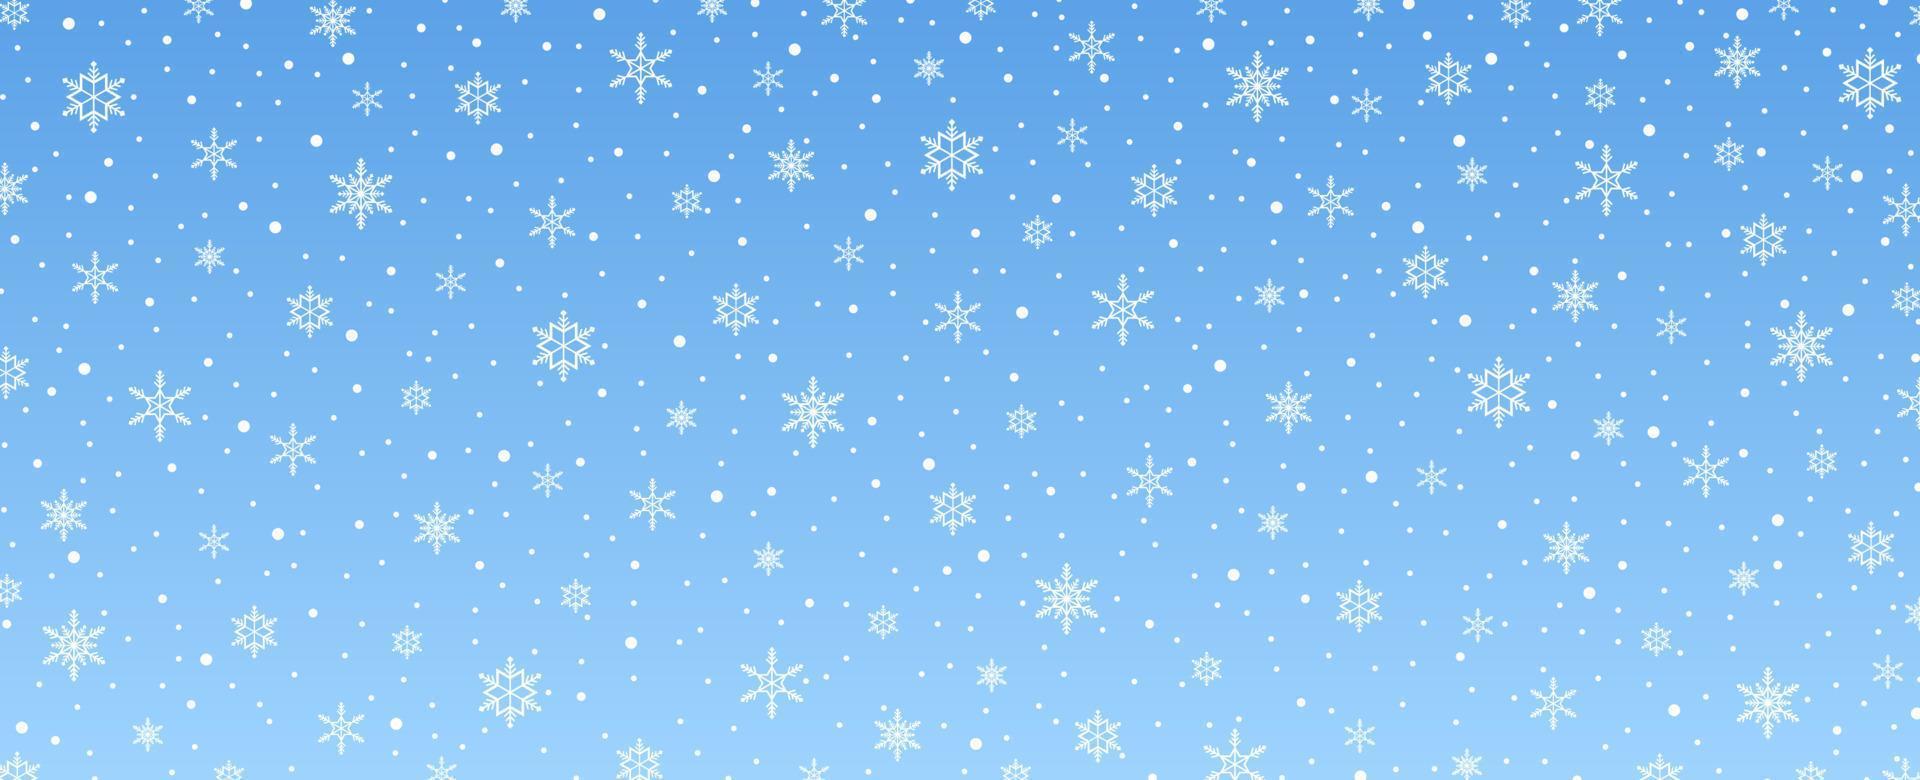 Merry Christmas with snowflakes and snowfall background vector